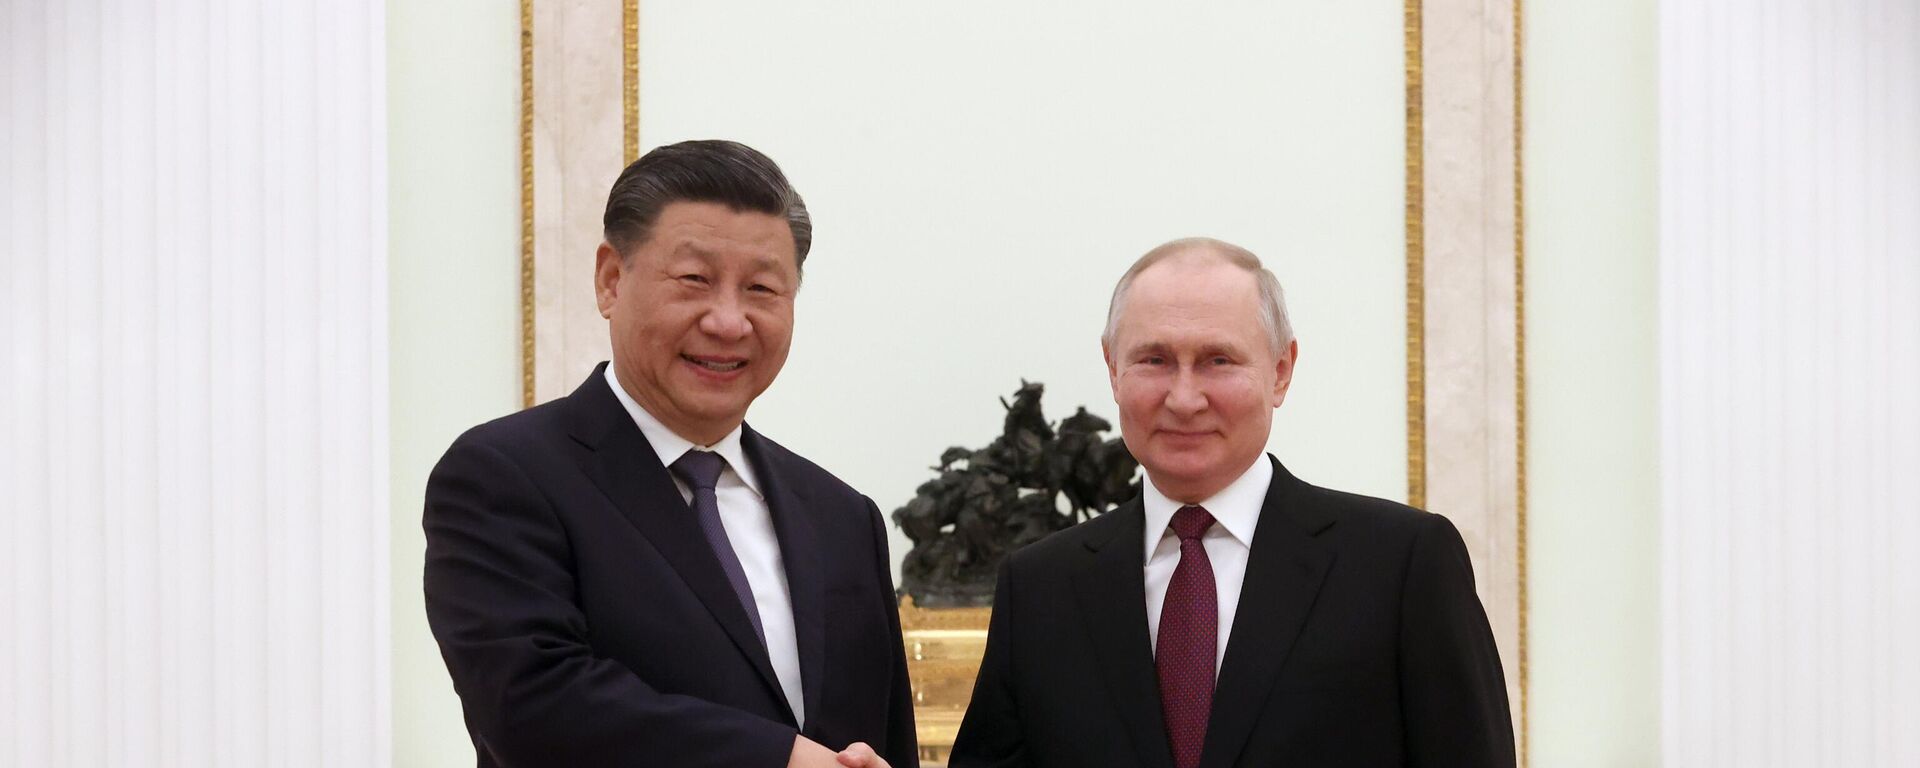 Chinese President Xi Jinping and Russian President Vladimir Putin shake hands during their meeting at the Kremlin in Moscow, Russia. - Sputnik International, 1920, 20.03.2023